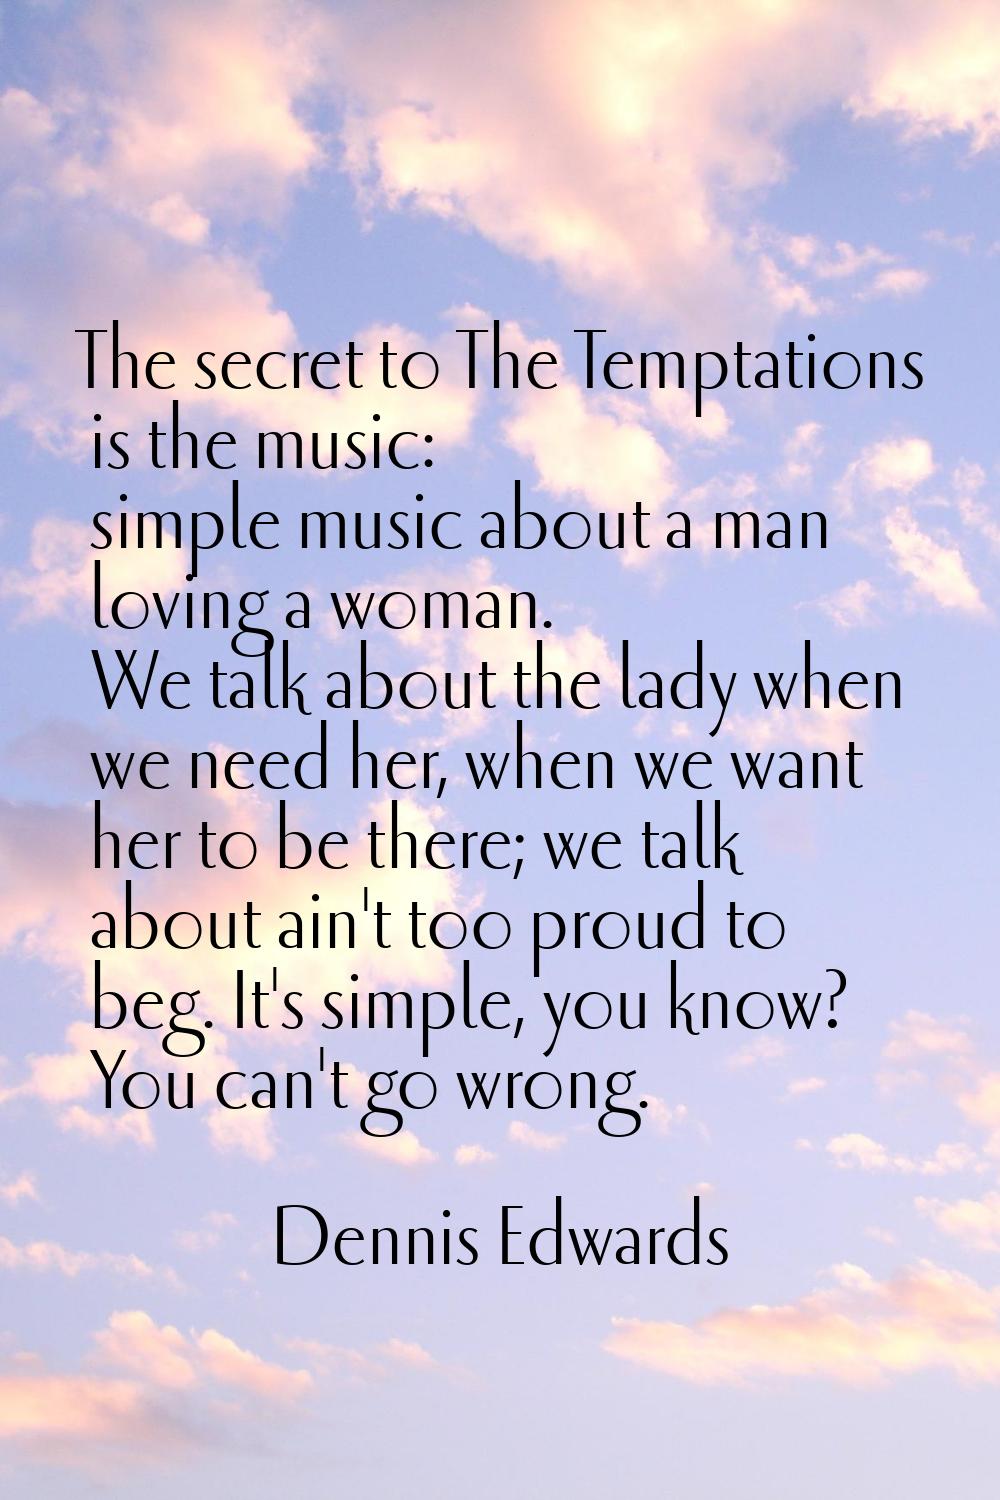 The secret to The Temptations is the music: simple music about a man loving a woman. We talk about 